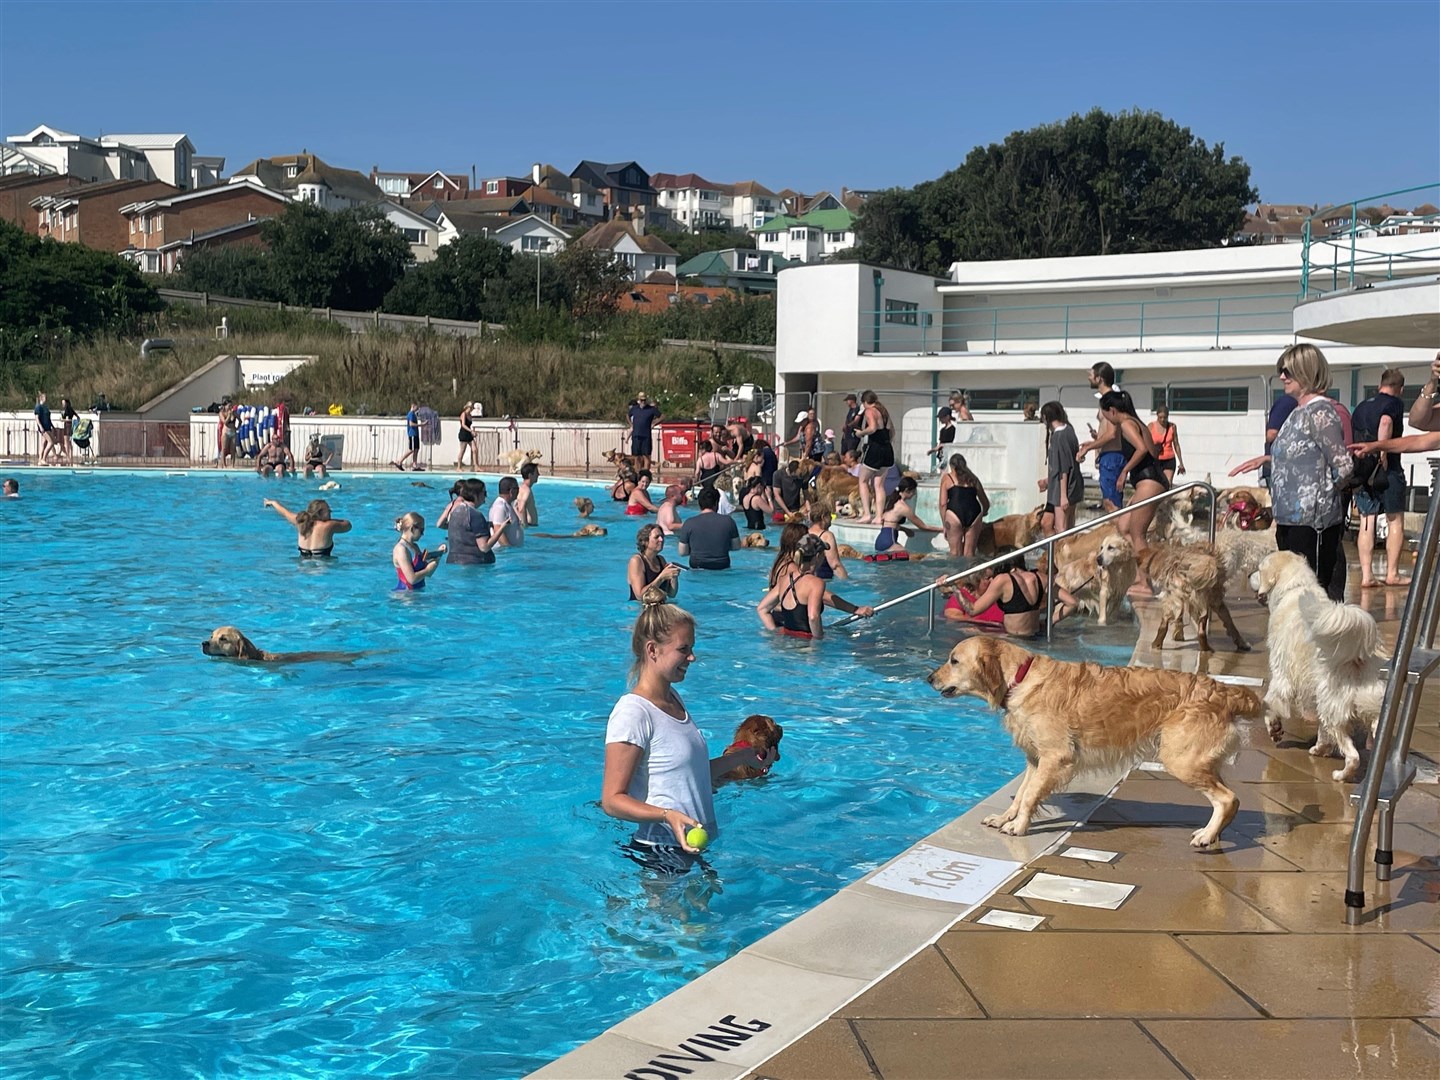 The Dogtember events have proven a huge success at Saltdean Lido in Brighton (Anahita Hossein-Pour/PA)